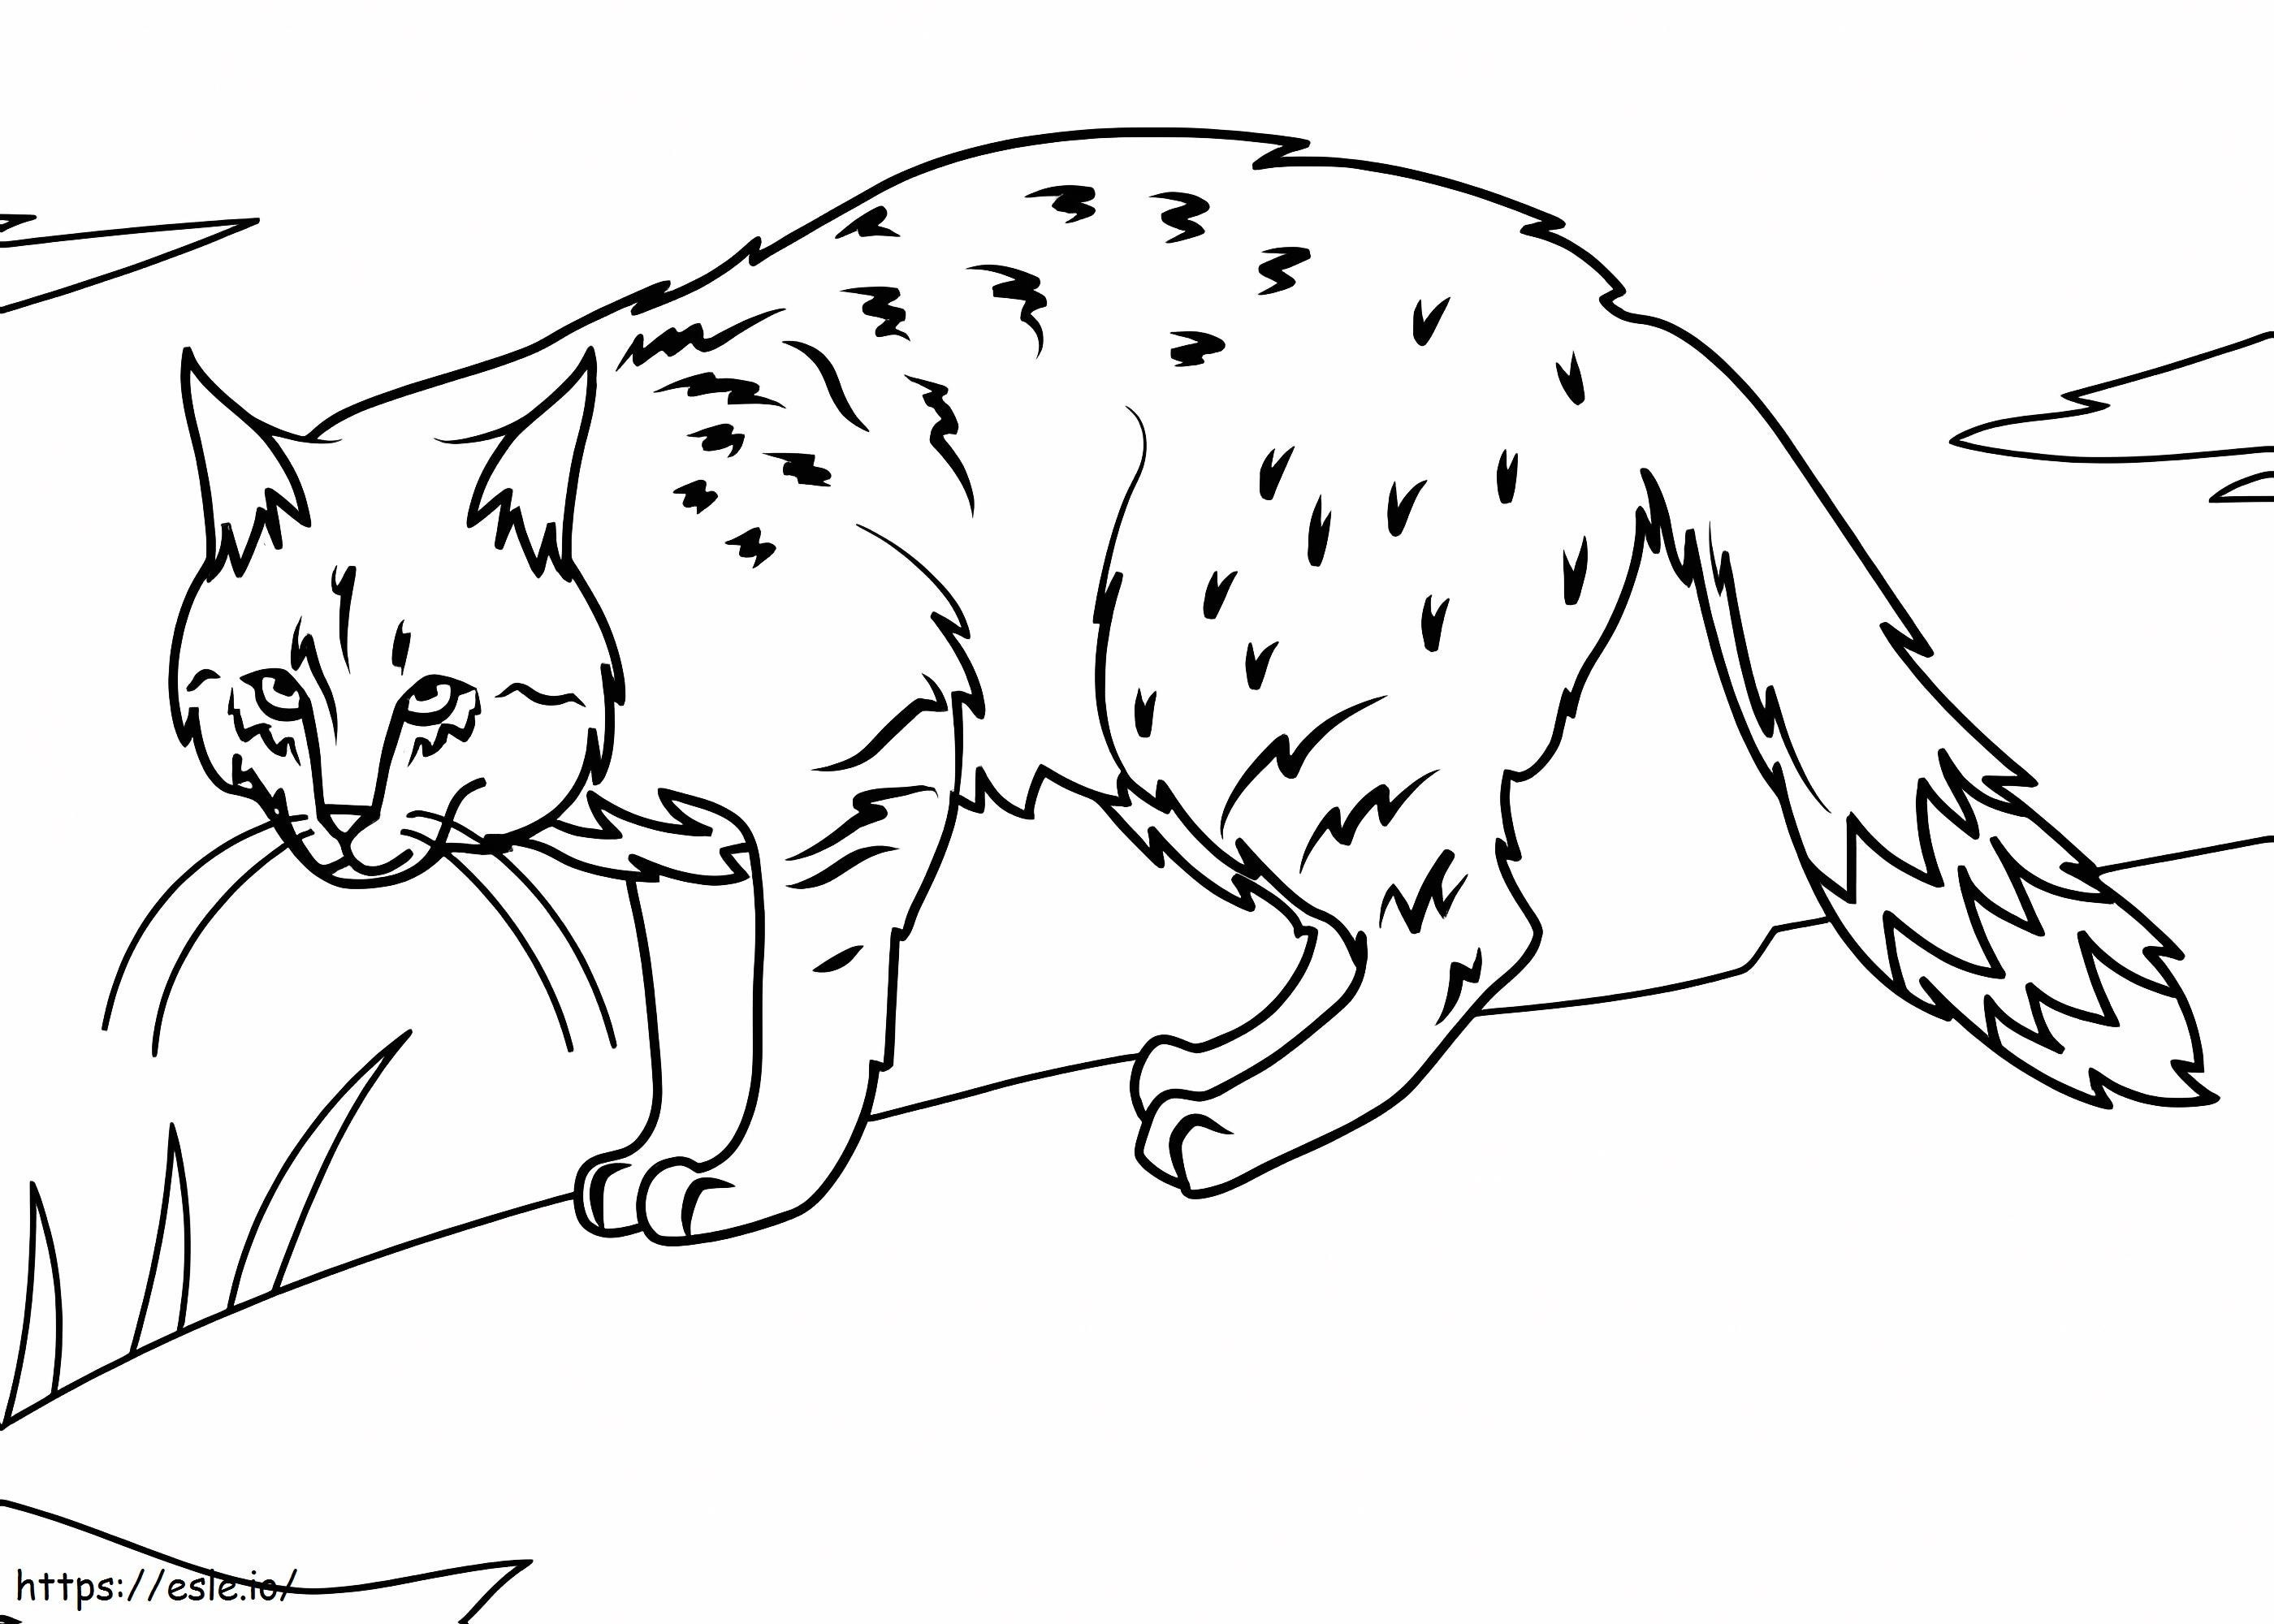 Mountain Cat coloring page